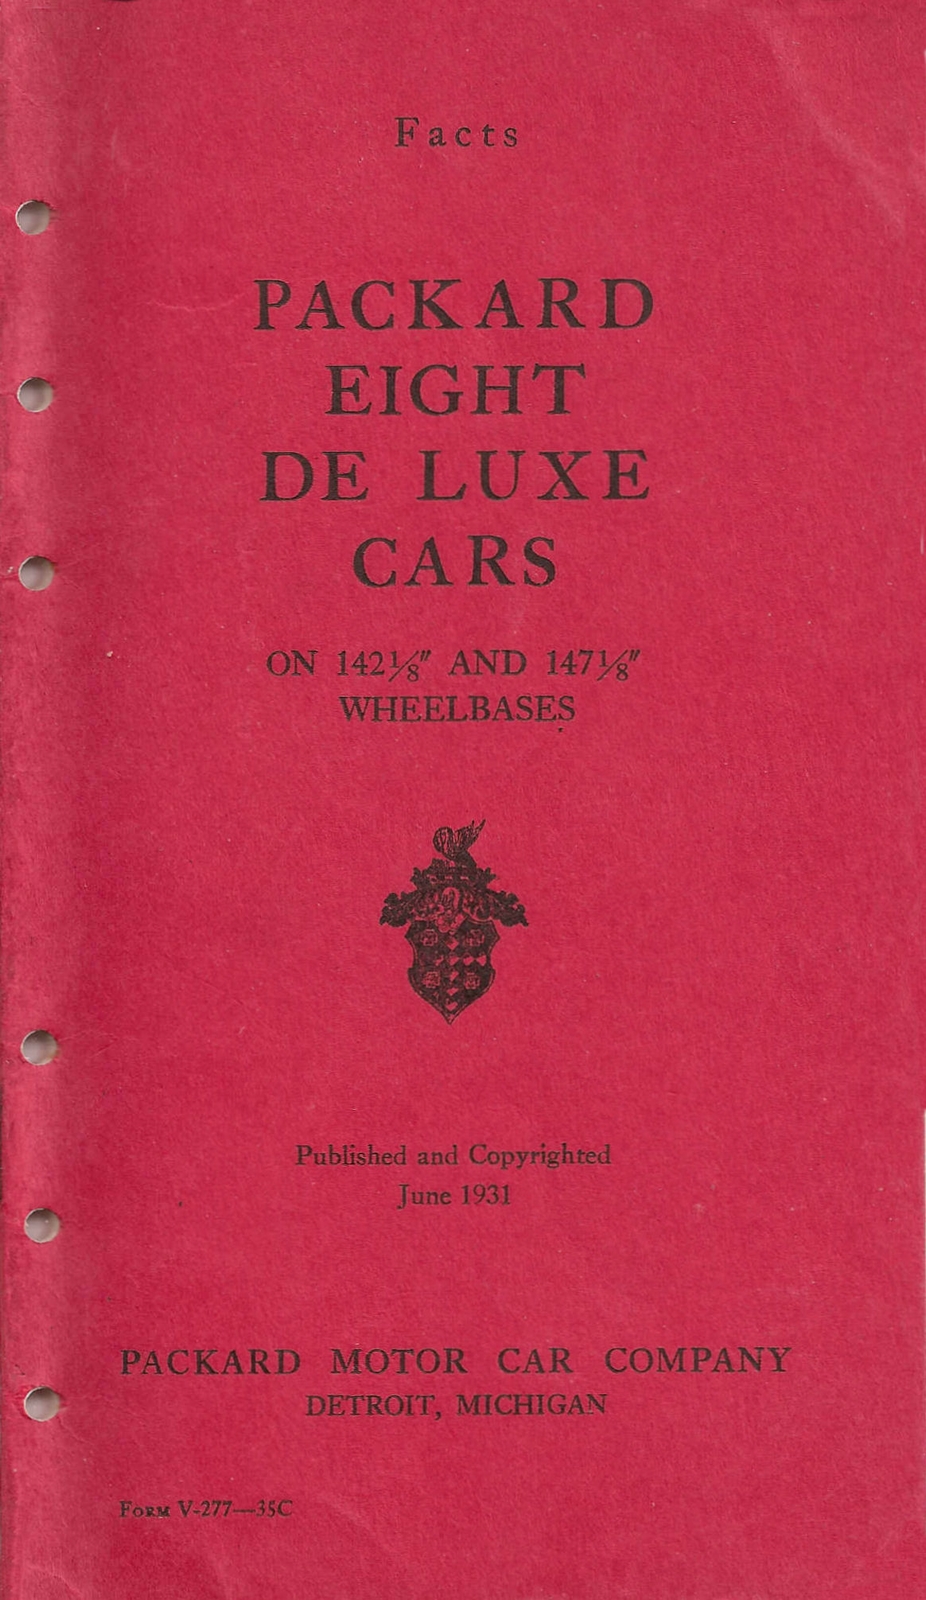 n_1932 Packard Eight Deluxe Facts Book-00.jpg